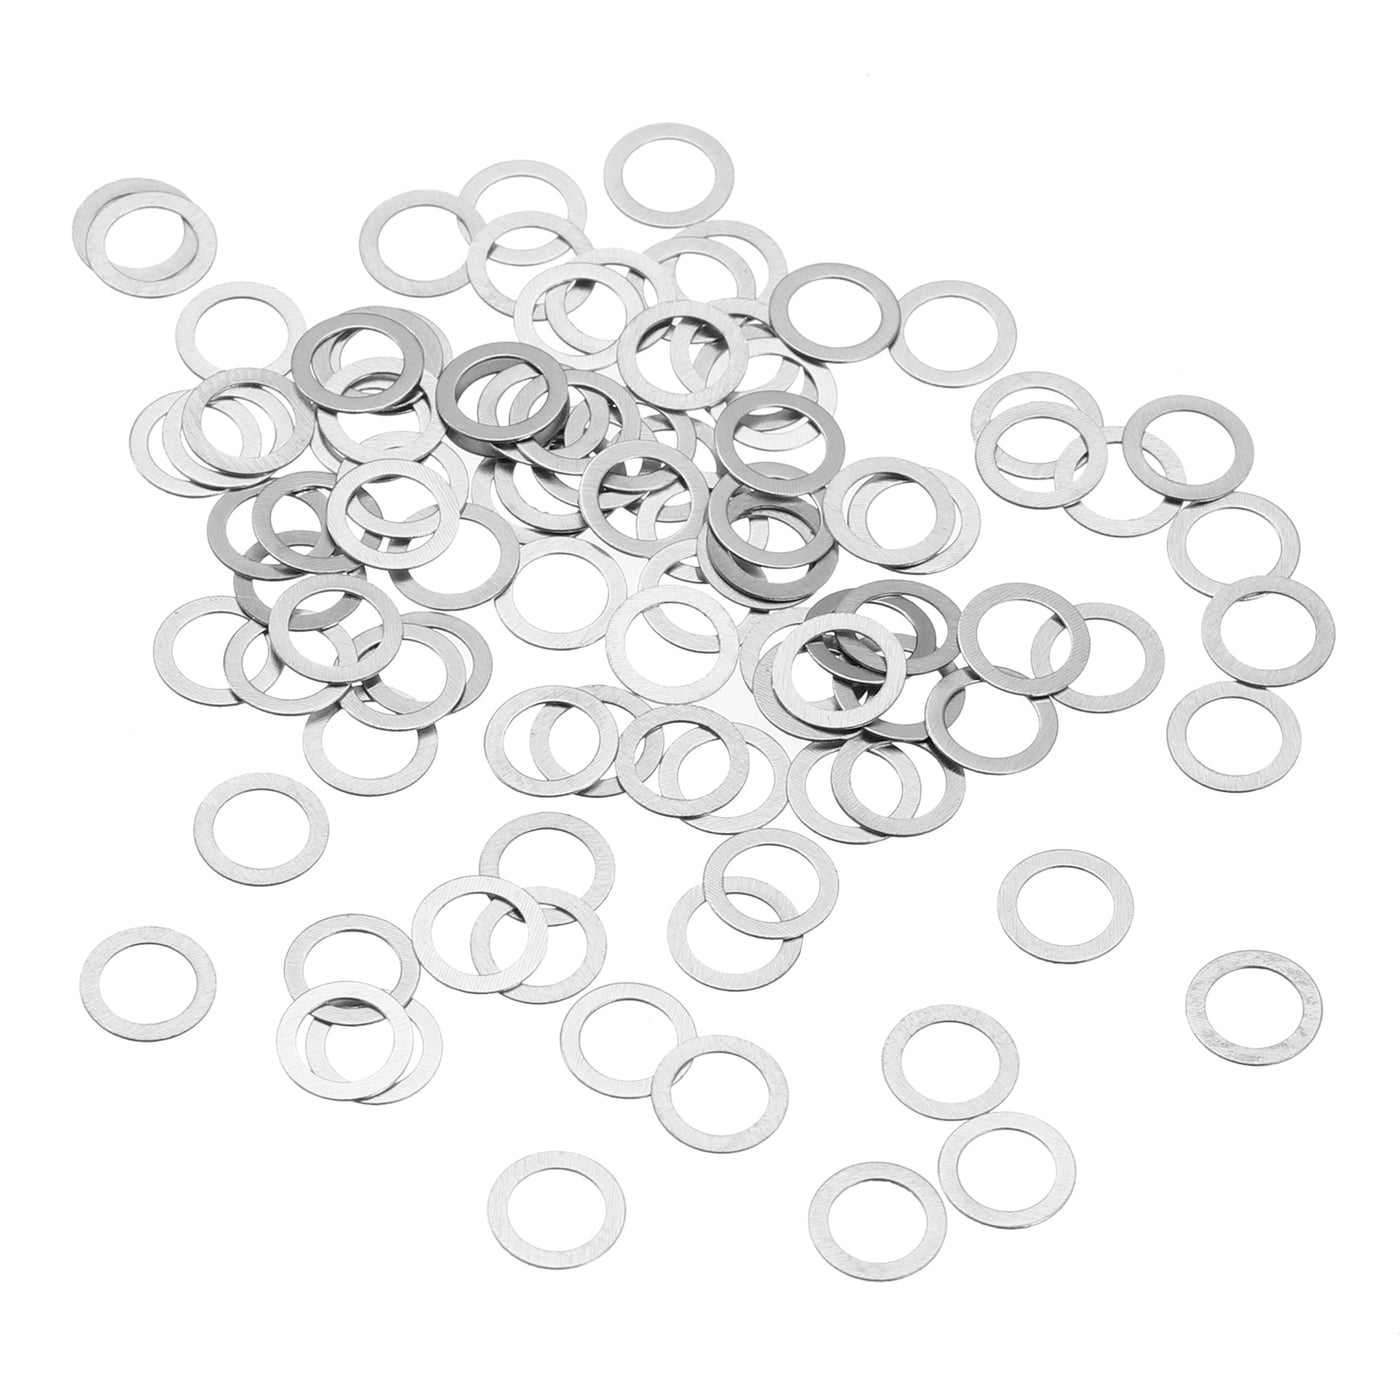 uxcell Uxcell M4 304 Stainless Steel Flat Washers, 100pcs 4x6x0.1mm Ultra Thin Flat Spacers